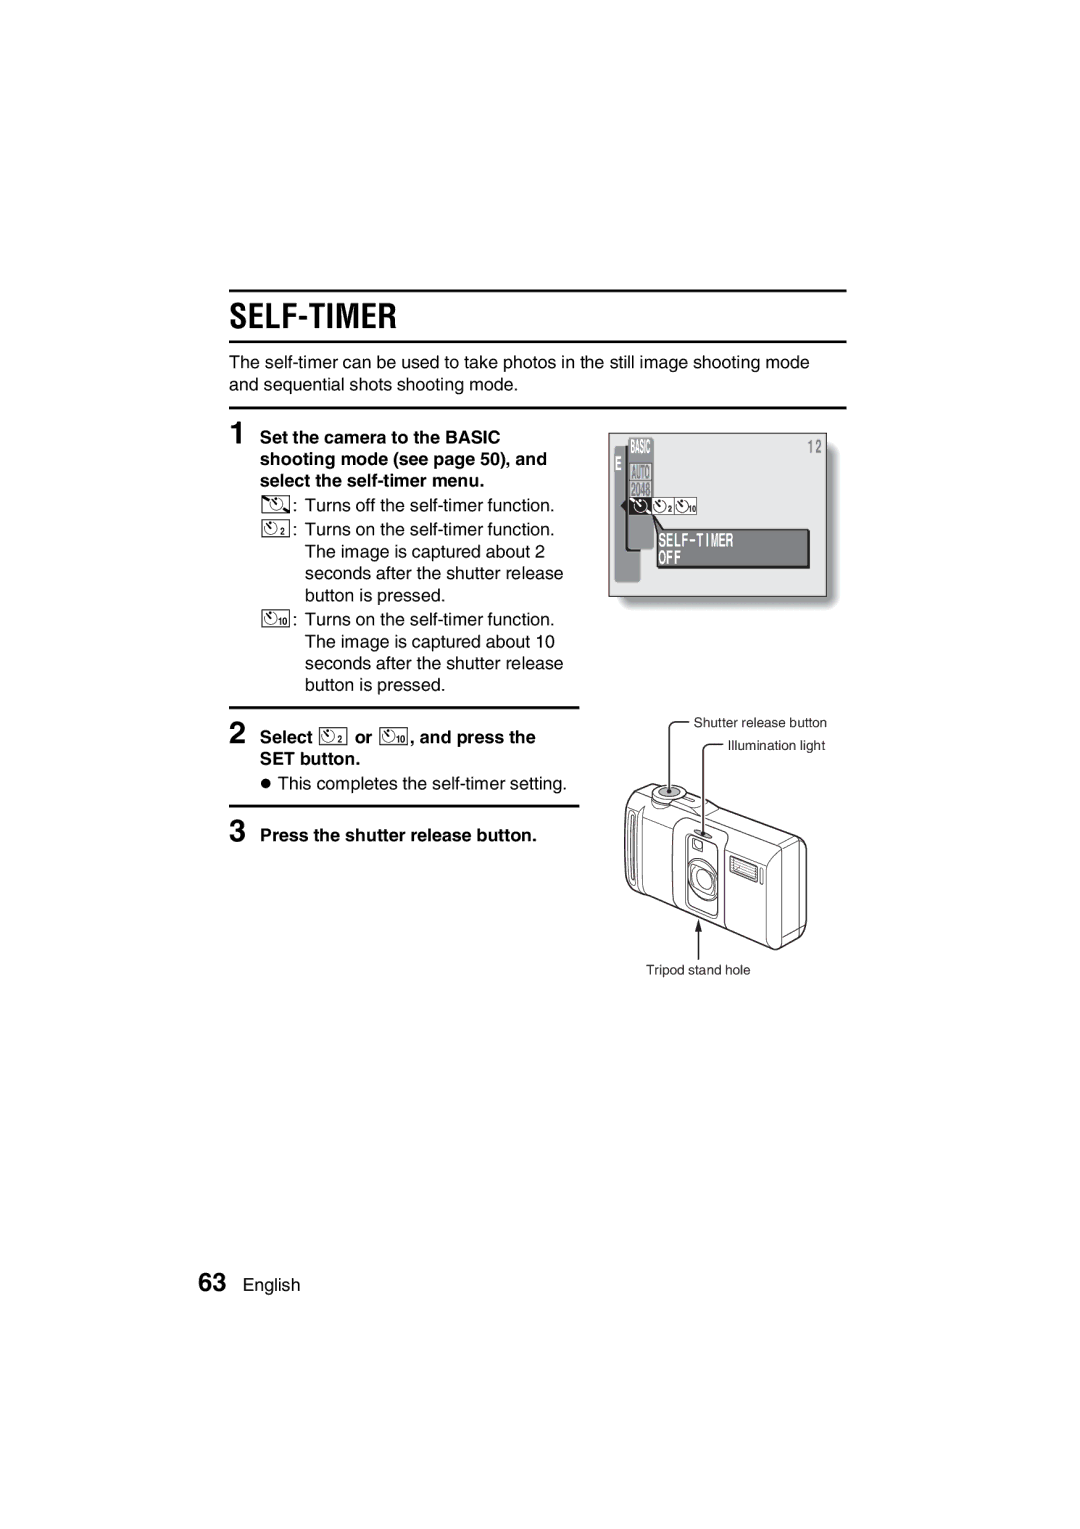 Sanyo VPC-J1EX instruction manual Self-Timer, Select ô or ò, and press SET button, Press the shutter release button, Off 